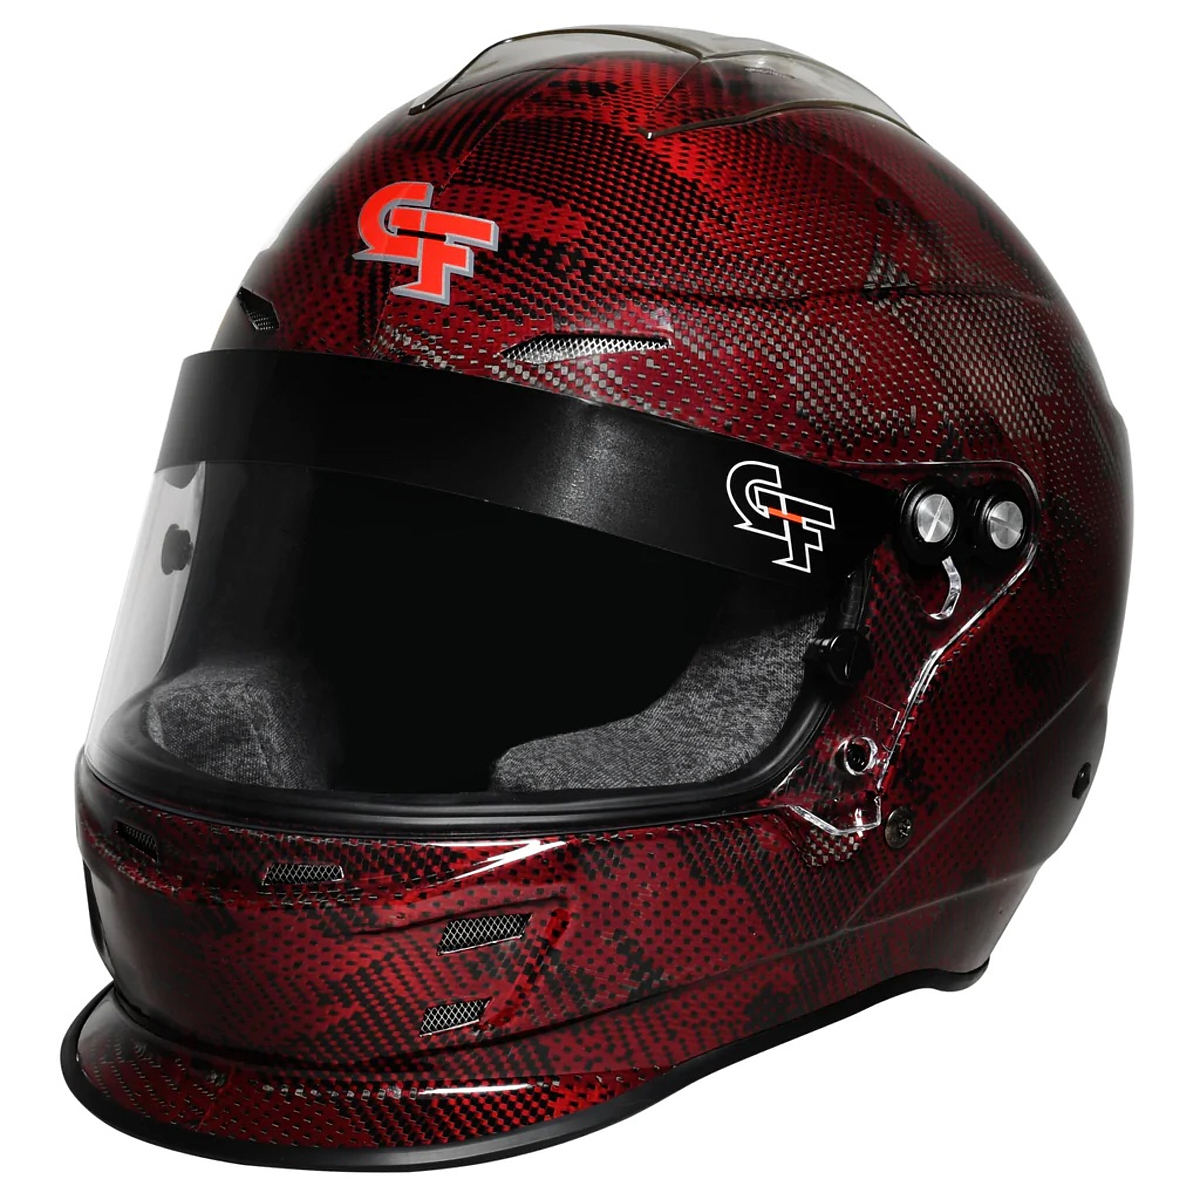 G-Force Racing Gear 16005MEDRD Helmet, Nova Fusion, Full Face, Snell SA 2020, Head and Neck Support Ready, Red, Medium, Each